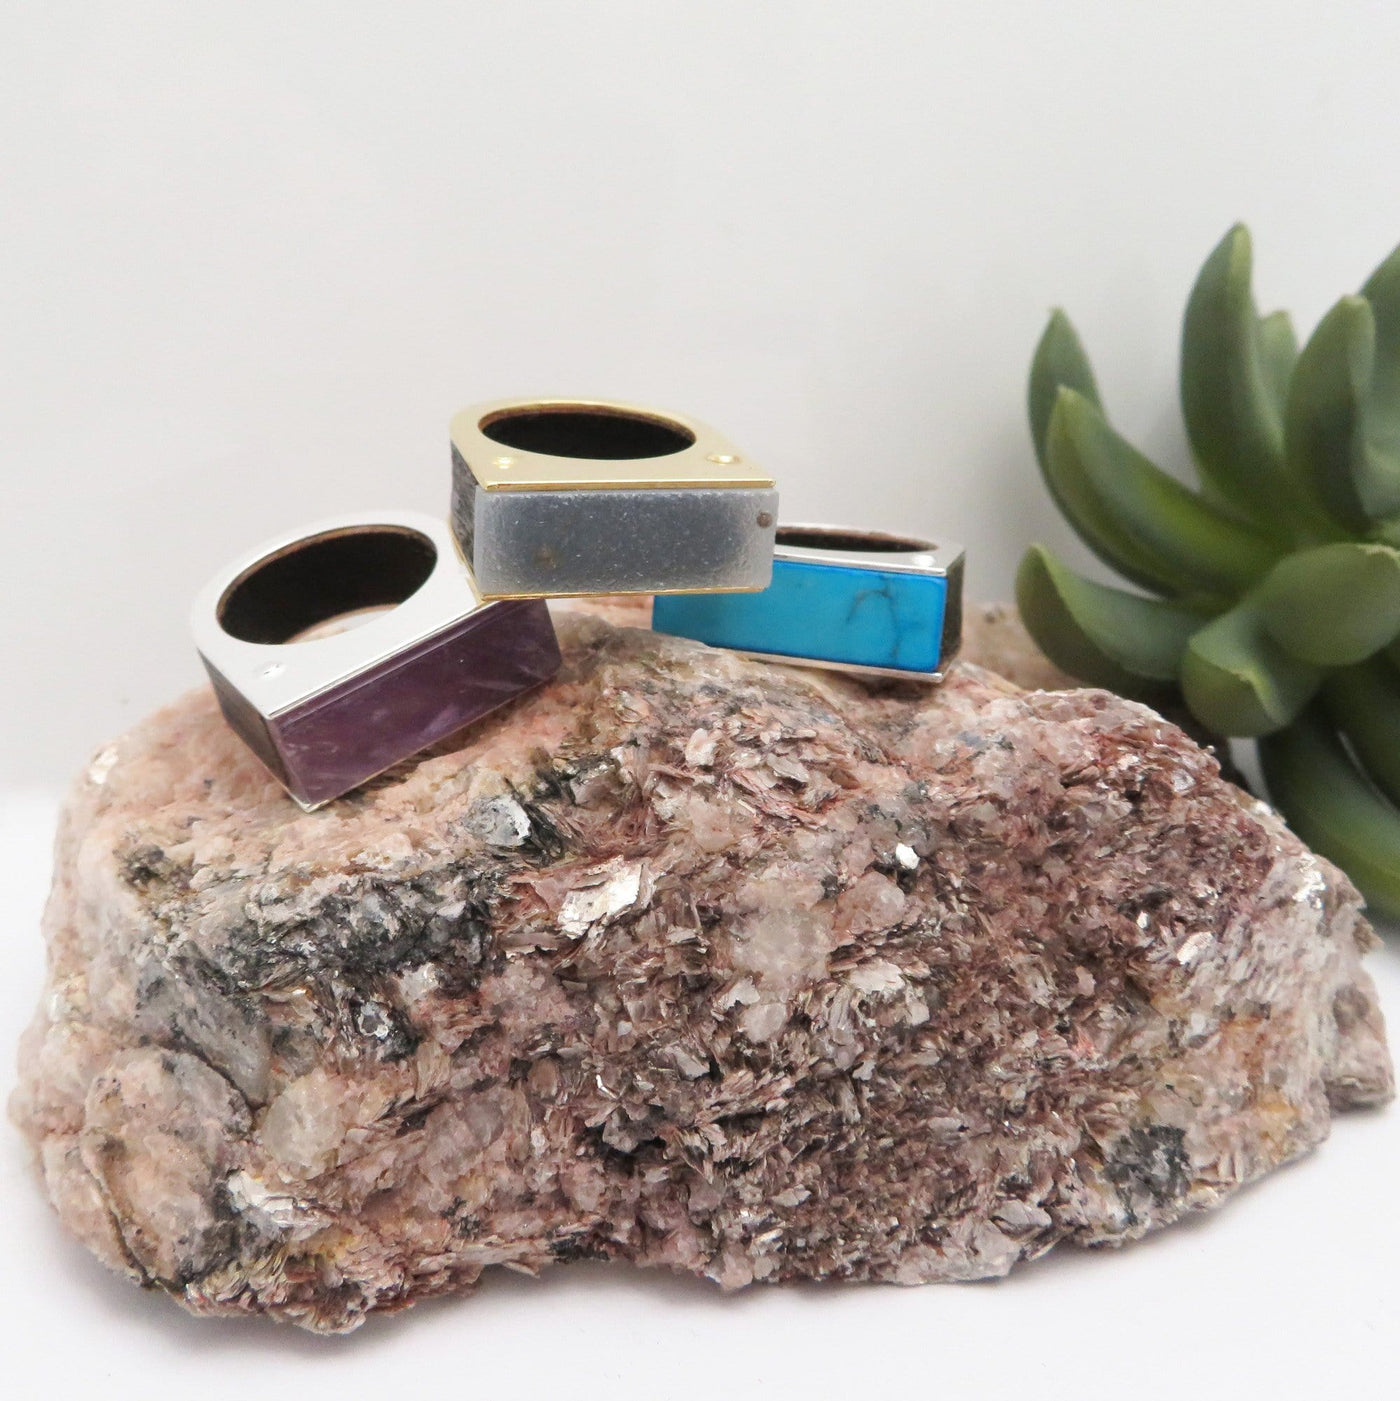 Amethyst, Druzy and Turquoise Howlite rings pictured on a black tourmaline with mica.